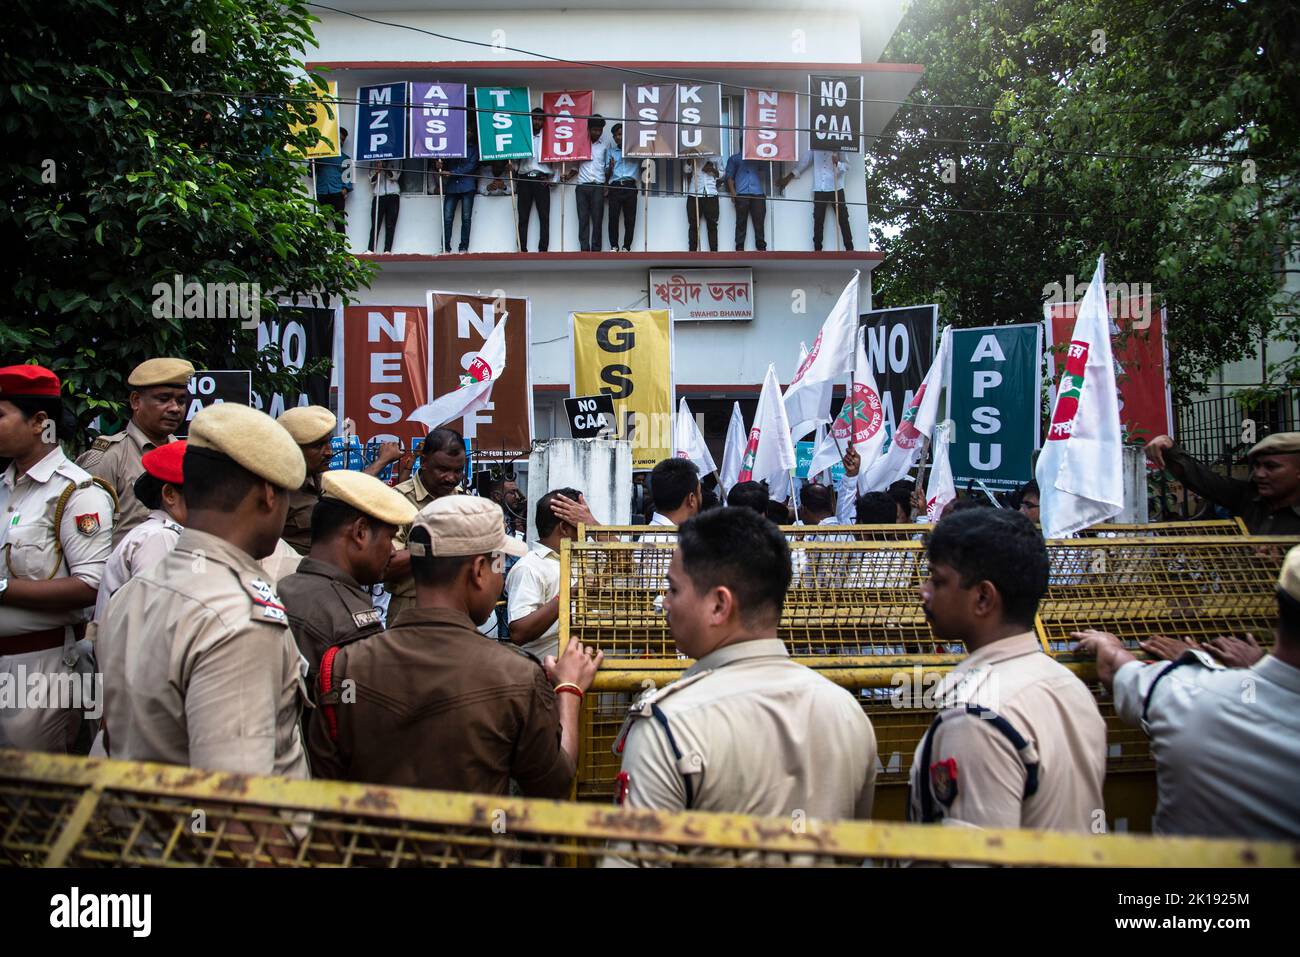 GUWAHATI, INDIA - AUGUST 17: Police personnel stand guard as North-East Students Organisation (NESO) leaders and activists stage a protest demanding scrapping of  Citizenship Amendment Act (CAA) on August 17, 2022 in Guwahati, India. Several student organisations in the northeast India renewed protests against the controversial Citizenship Amendment Act (CAA) after nearly two years. Stock Photo